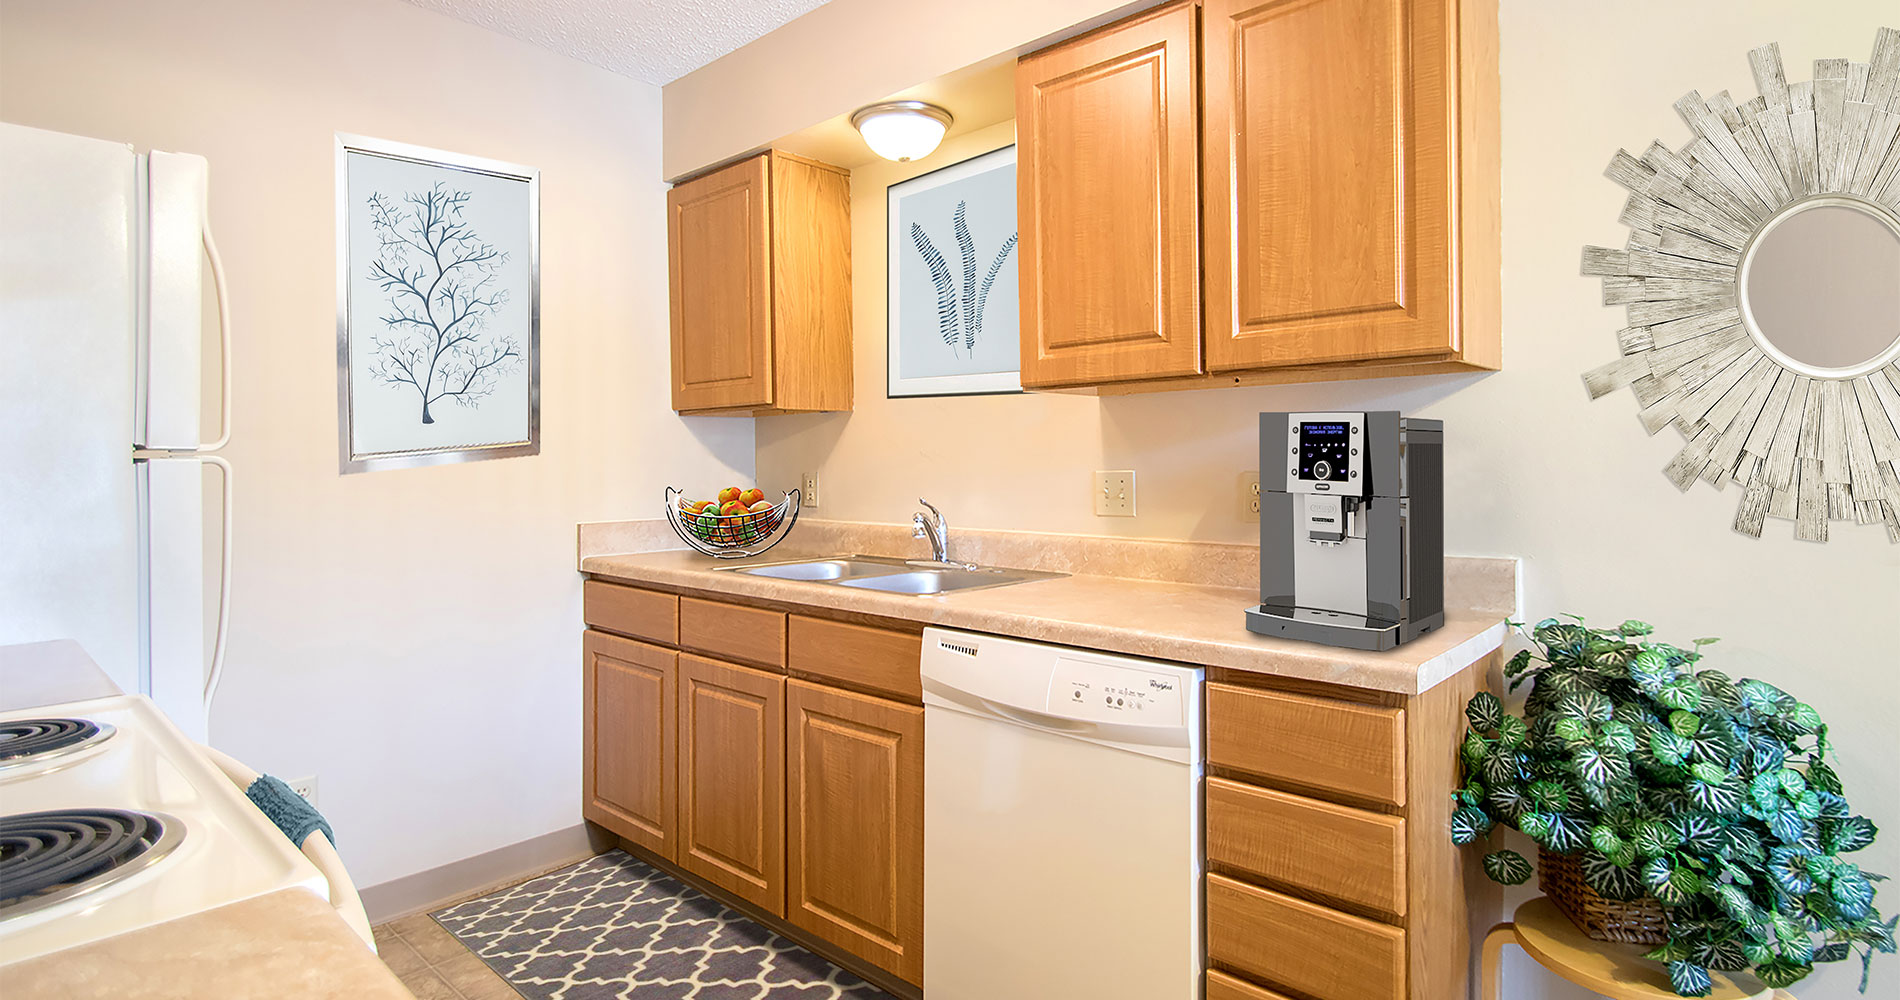 Fully-Equipped Kitchen with Spacious Counterspace & Coffeemaker